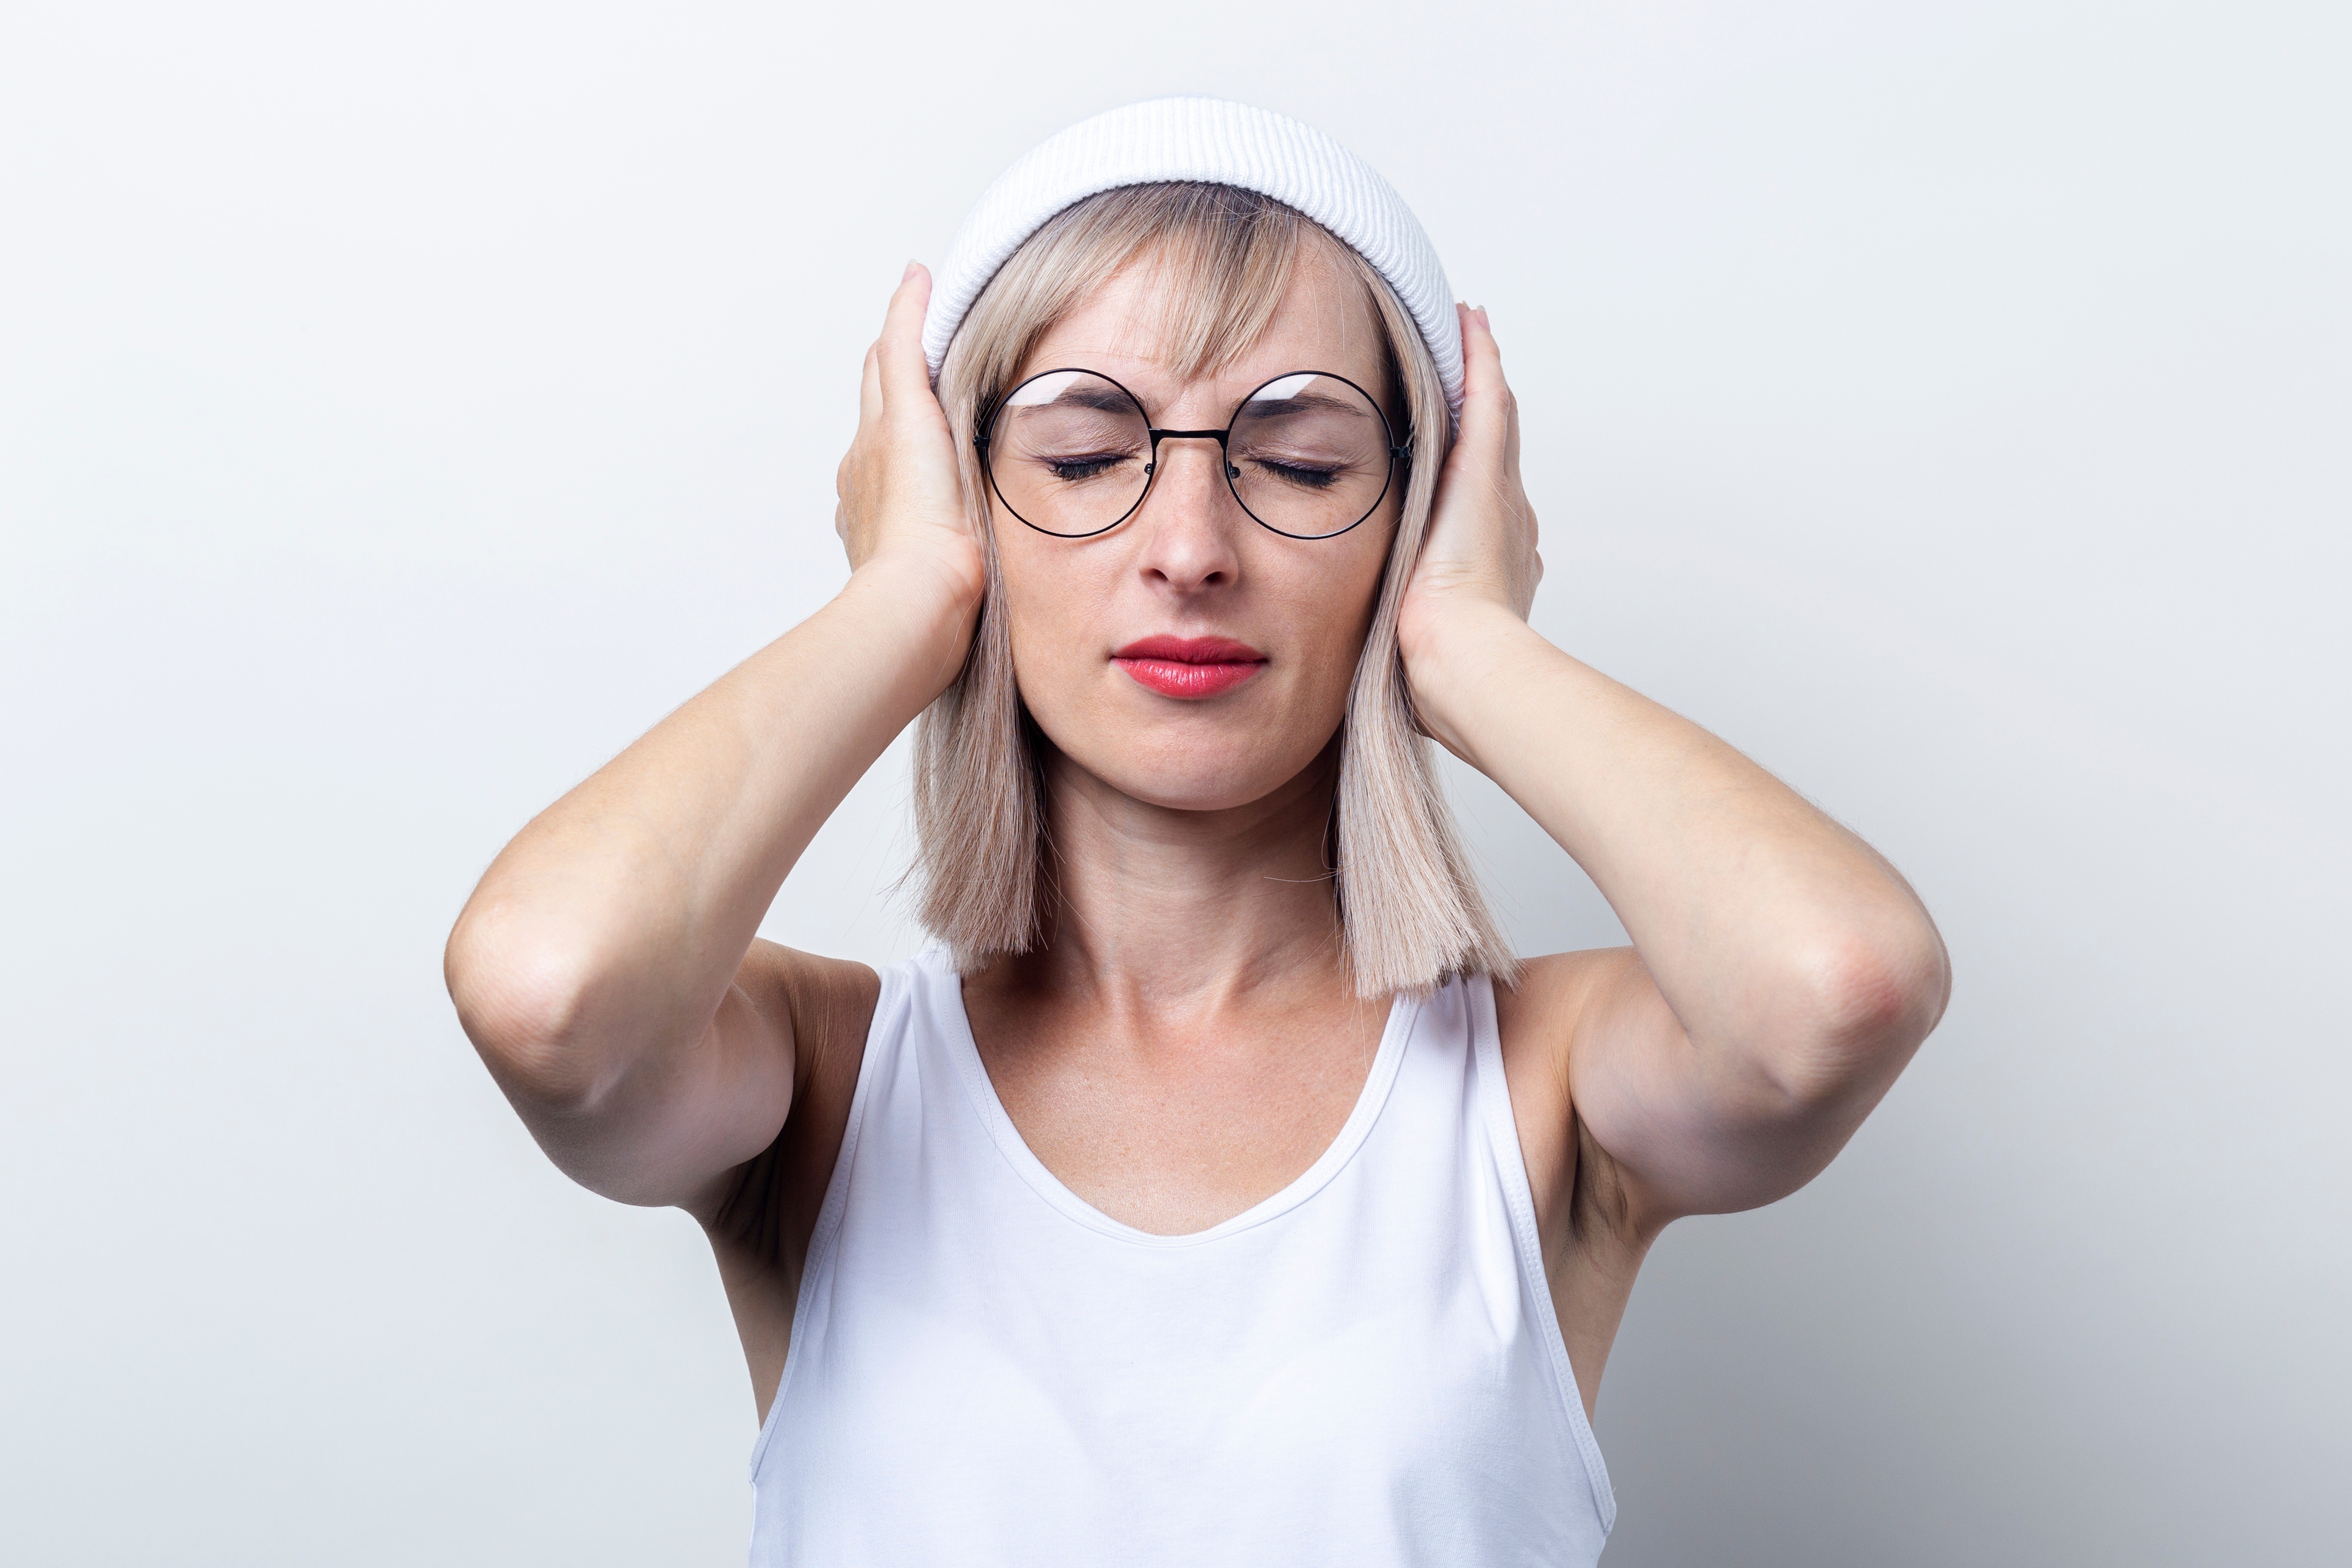 6 Common Ear Problems and What You Can Do